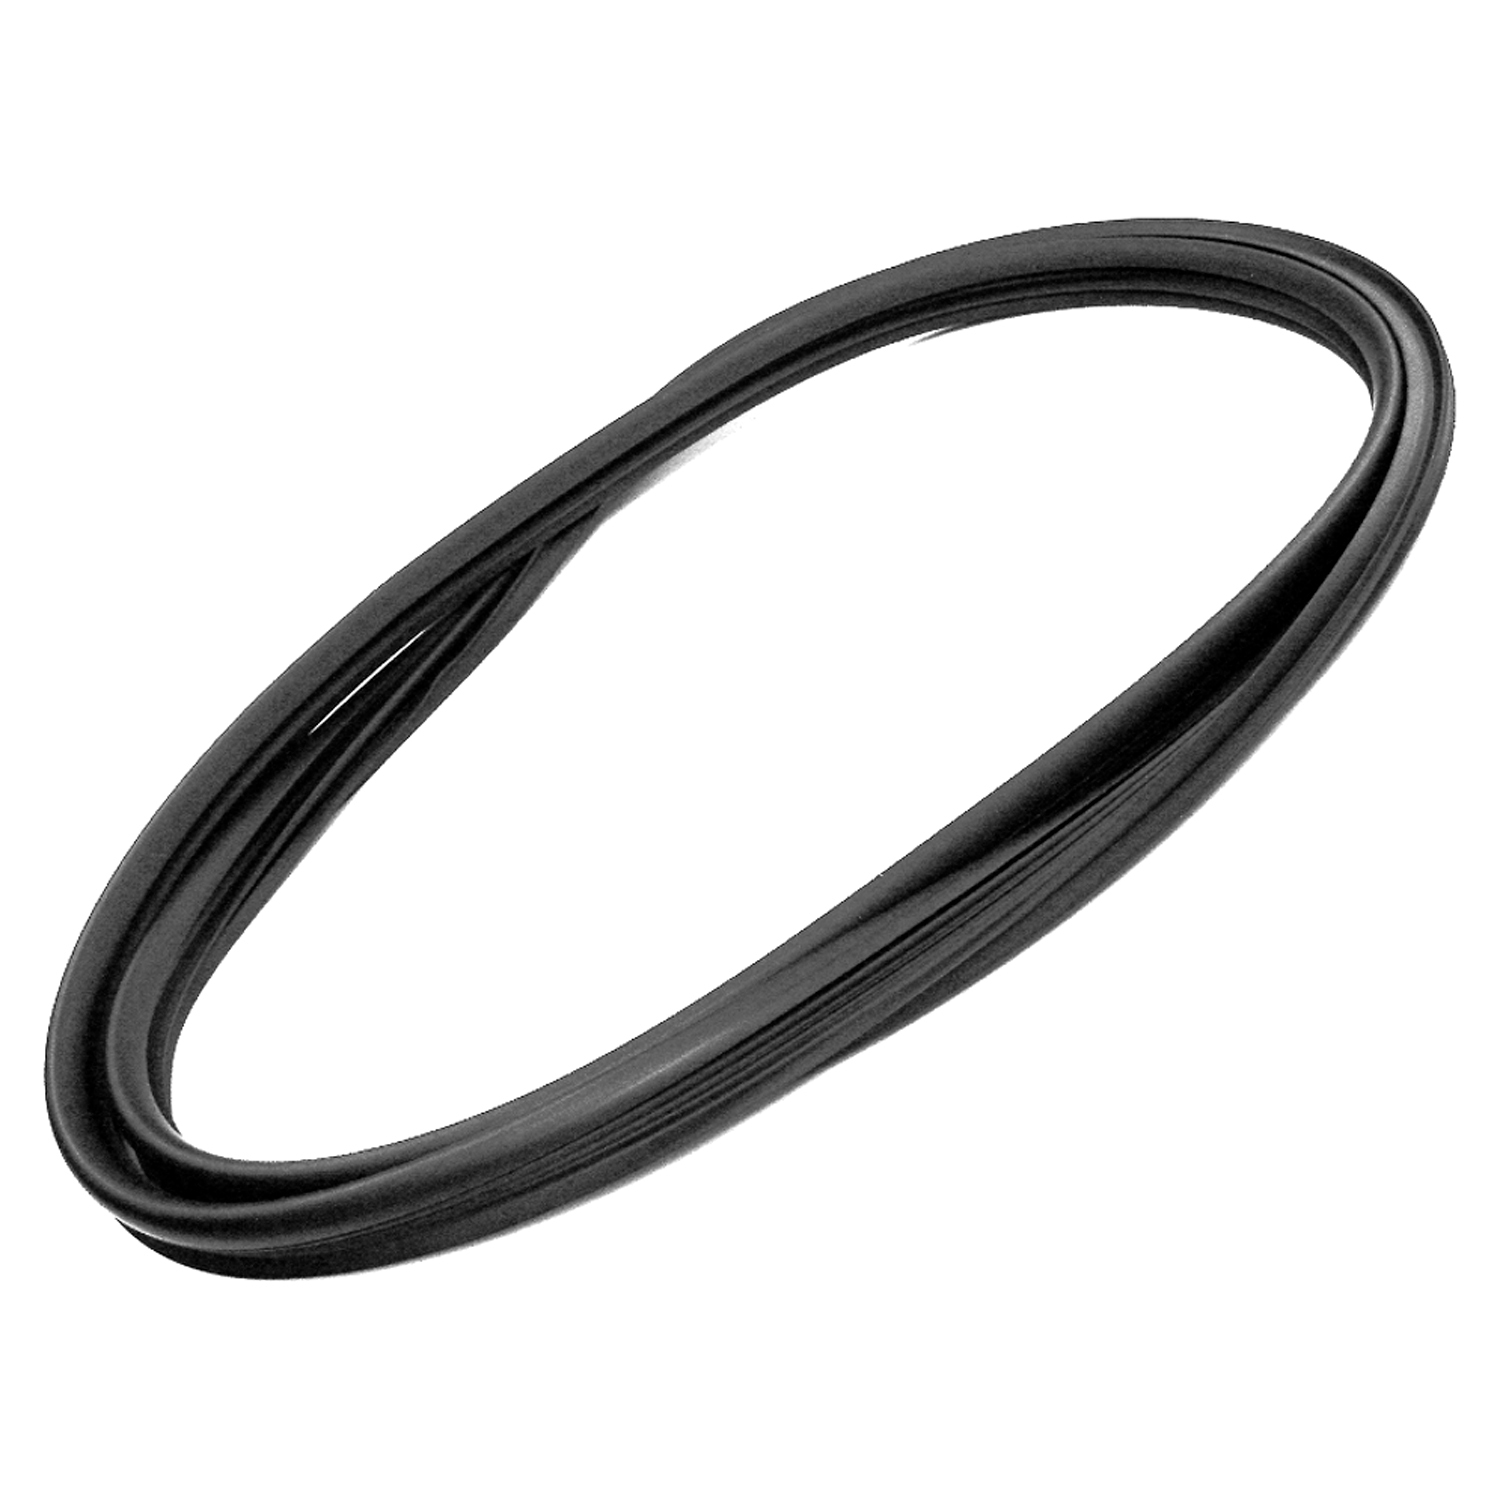 1987 GMC Jimmy Windshield Seal, 73-87 GM Full Size Truck, 73-91 GM SUV, Without Trim Groove-VWS 7313-D